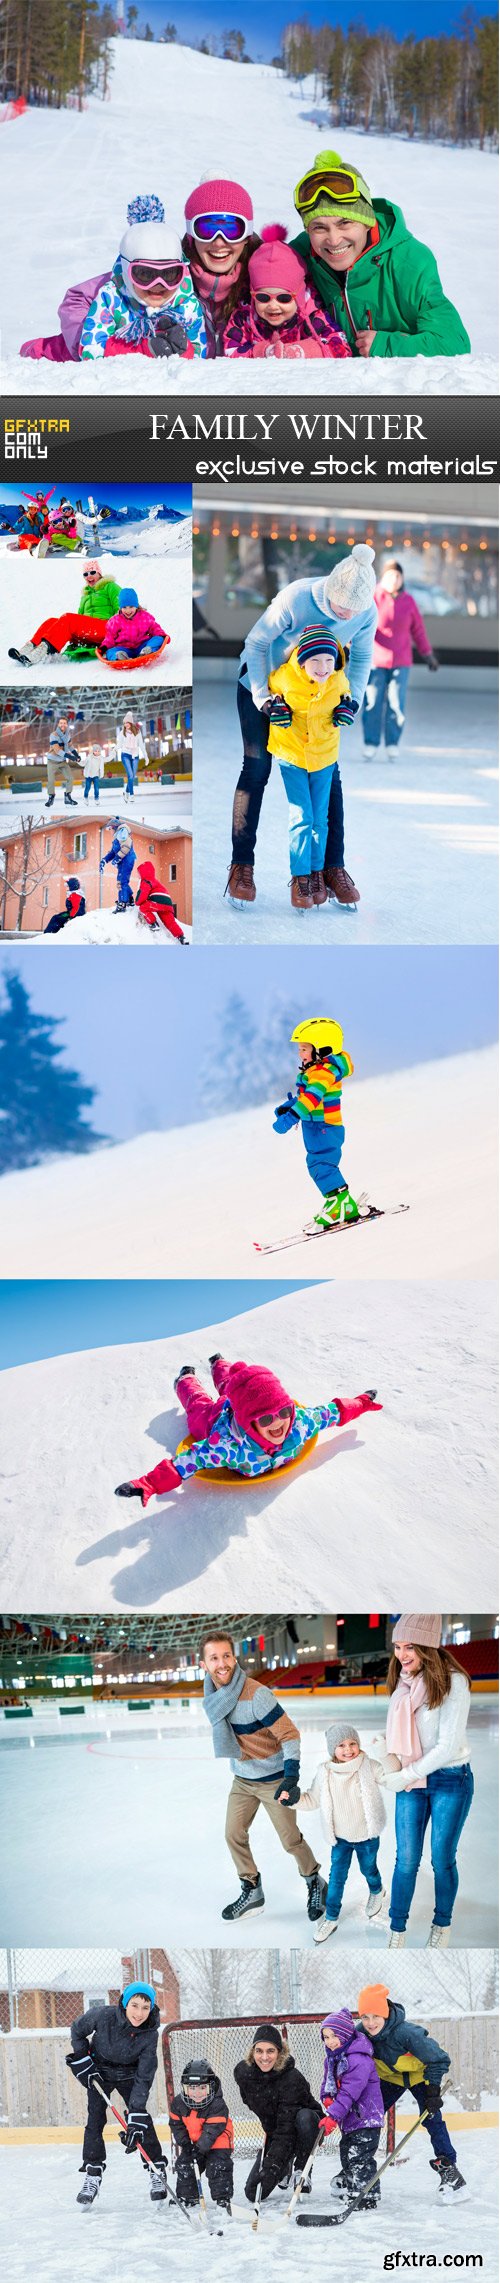 Family in winter - 10 UHQ JPEG